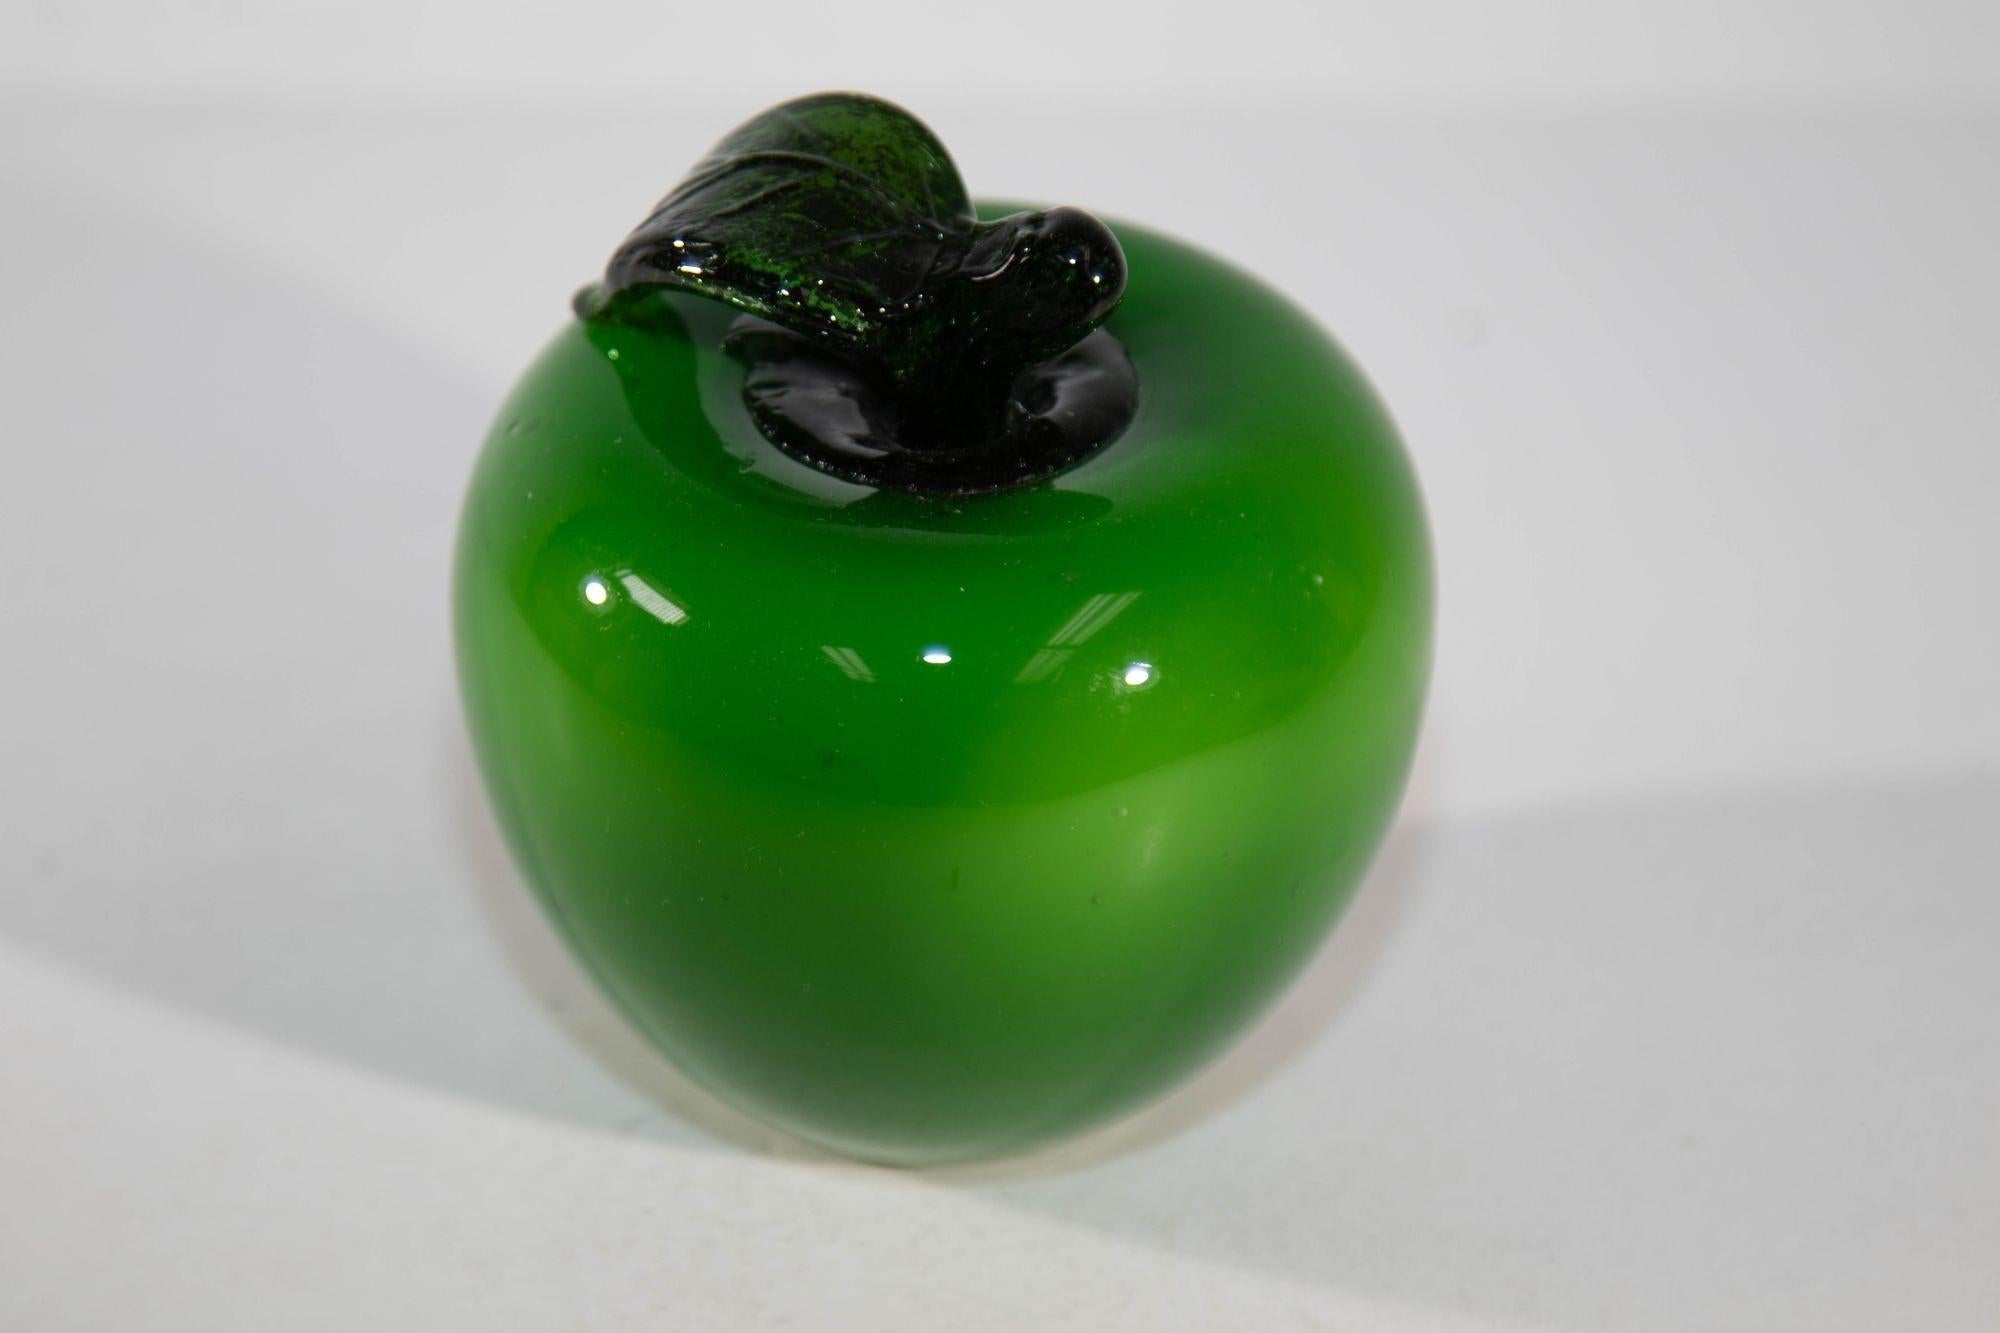 Vintage Murano Blown Glass Bright Green Apple with Green Stem Paperweight.
Beautiful blown glass apple in such a gorgeous vibrant emerald green.
Delightful figurative art glass out of Murano Italy.
This piece has a brilliant coloring and